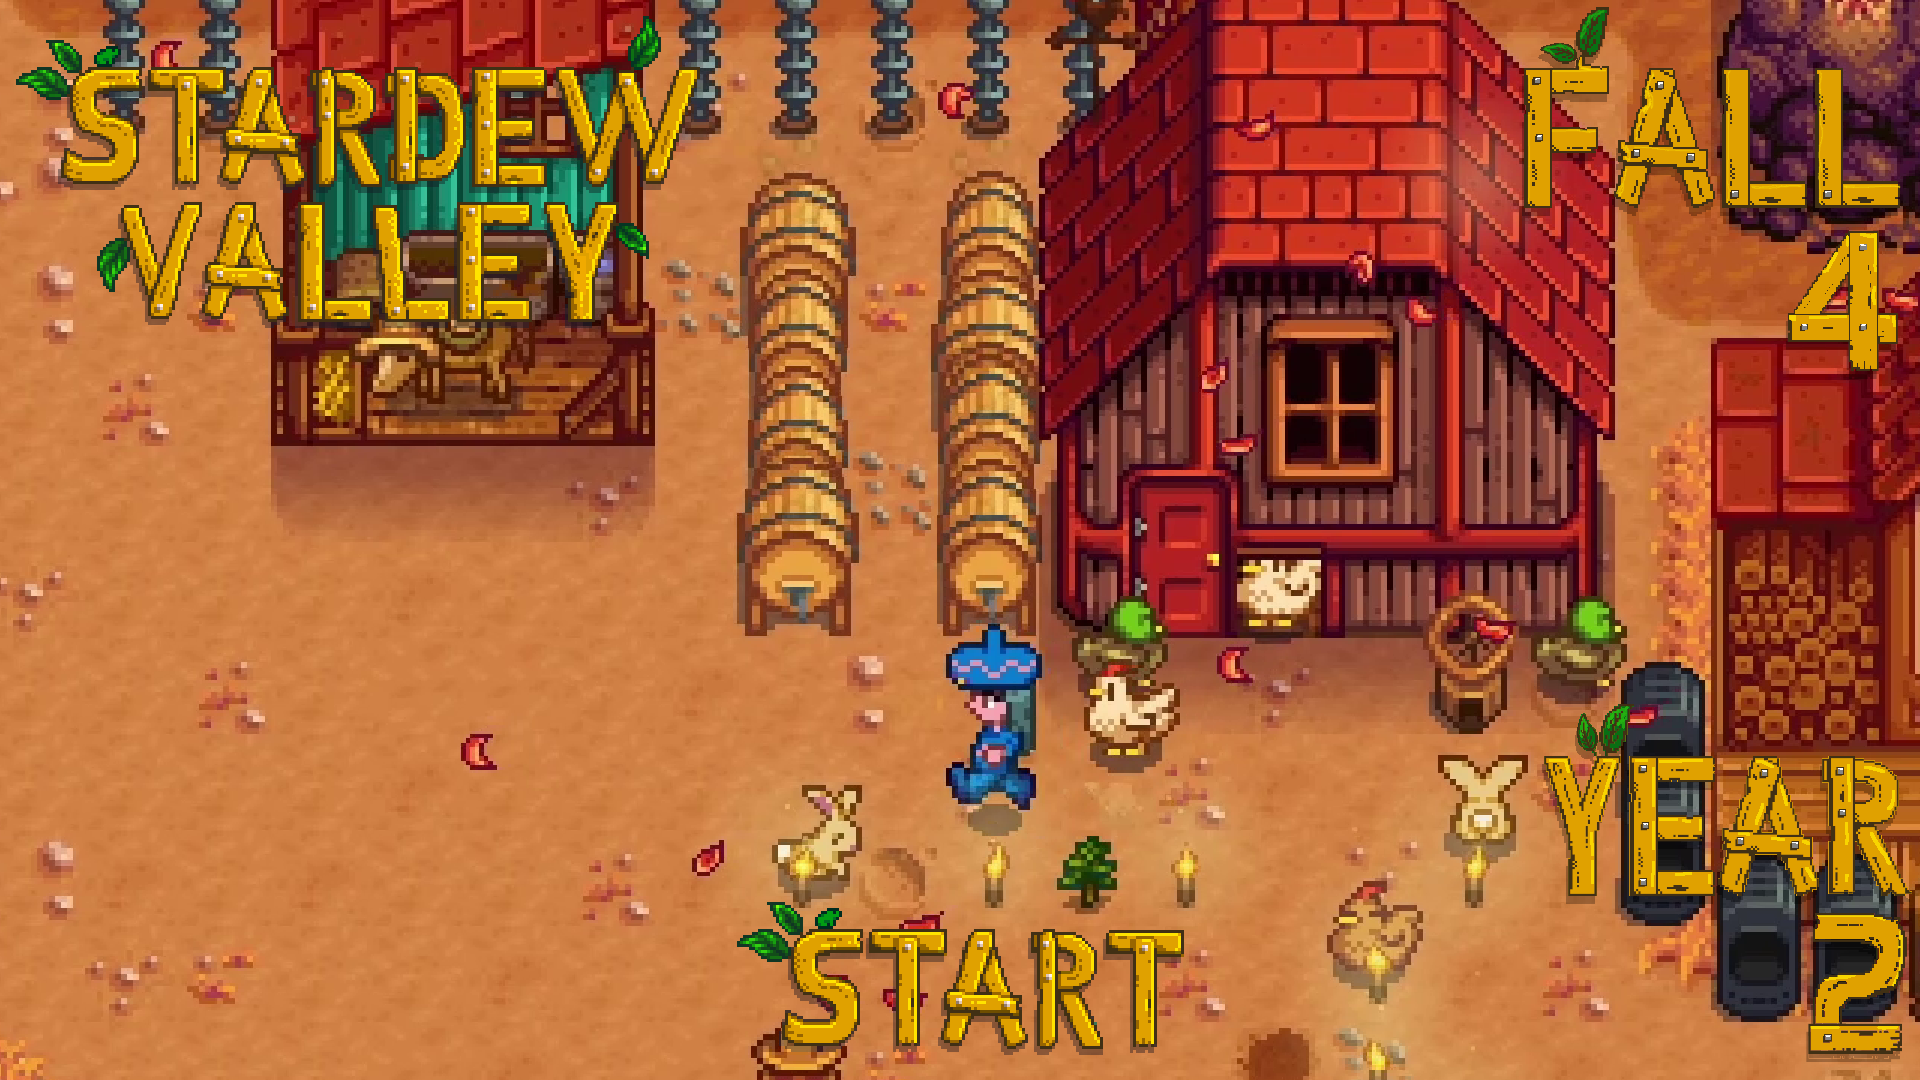 You Ever Shake A Rabbit? – Stardew Valley, Fall 4, Year 2, Start